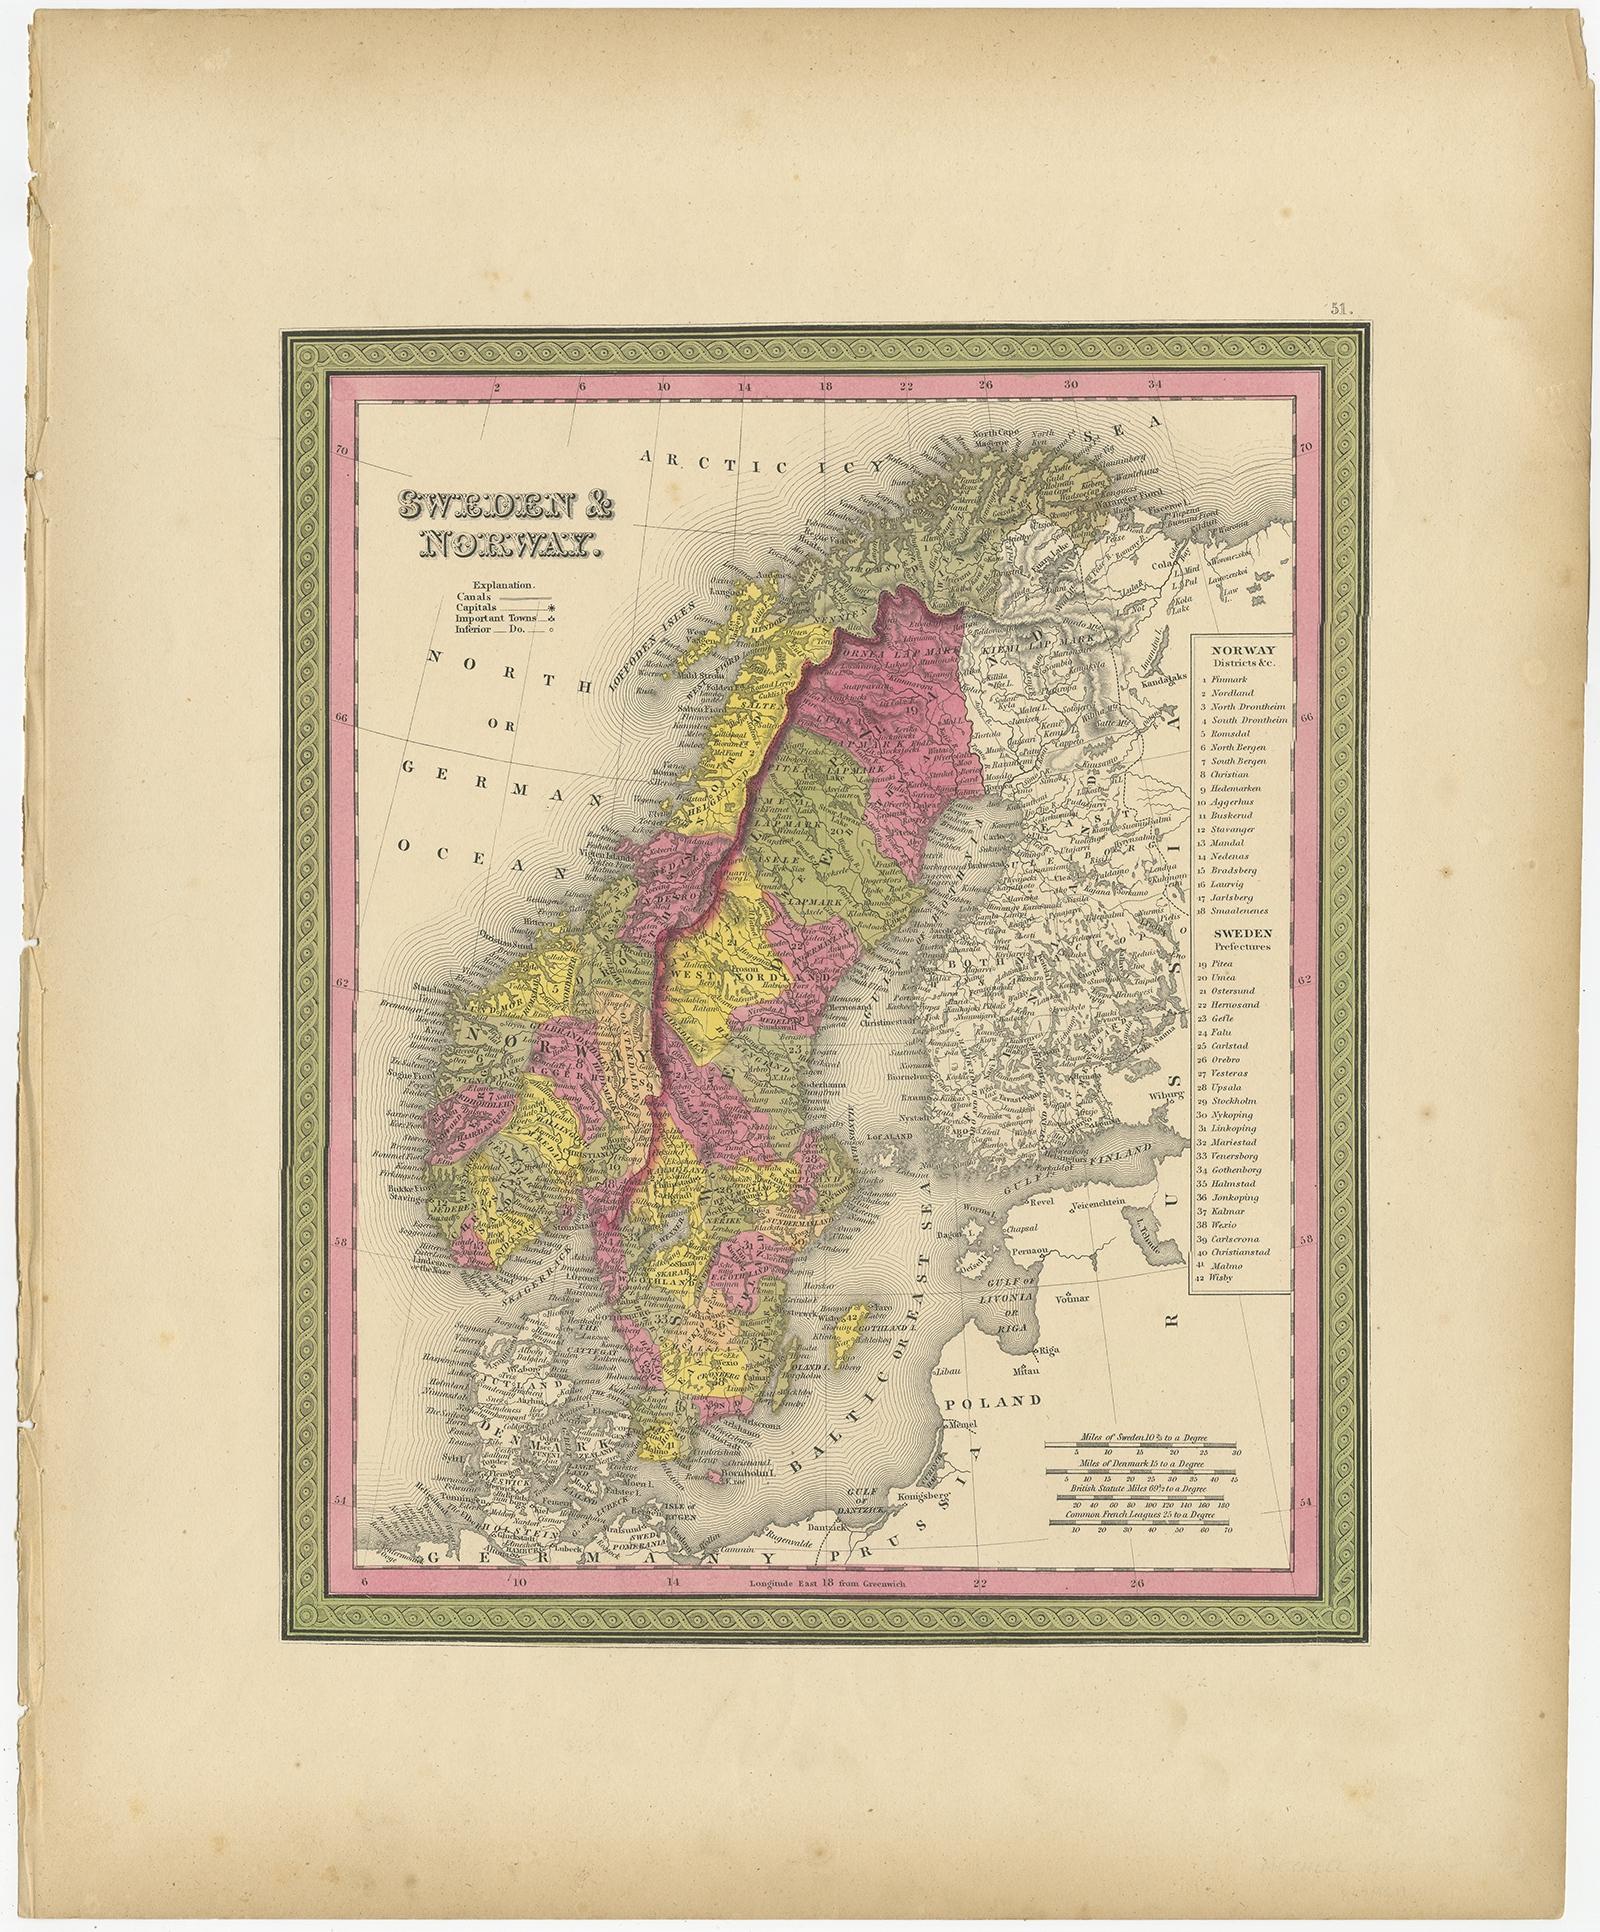 Antique map titled 'Sweden & Norway'. Old map of Sweden and Norway. 

This map originates from 'A New Universal Atlas Containing Maps of the various Empires, Kingdoms, States and Republics Of The World (..) by S.A. Mitchell. 

Artists and